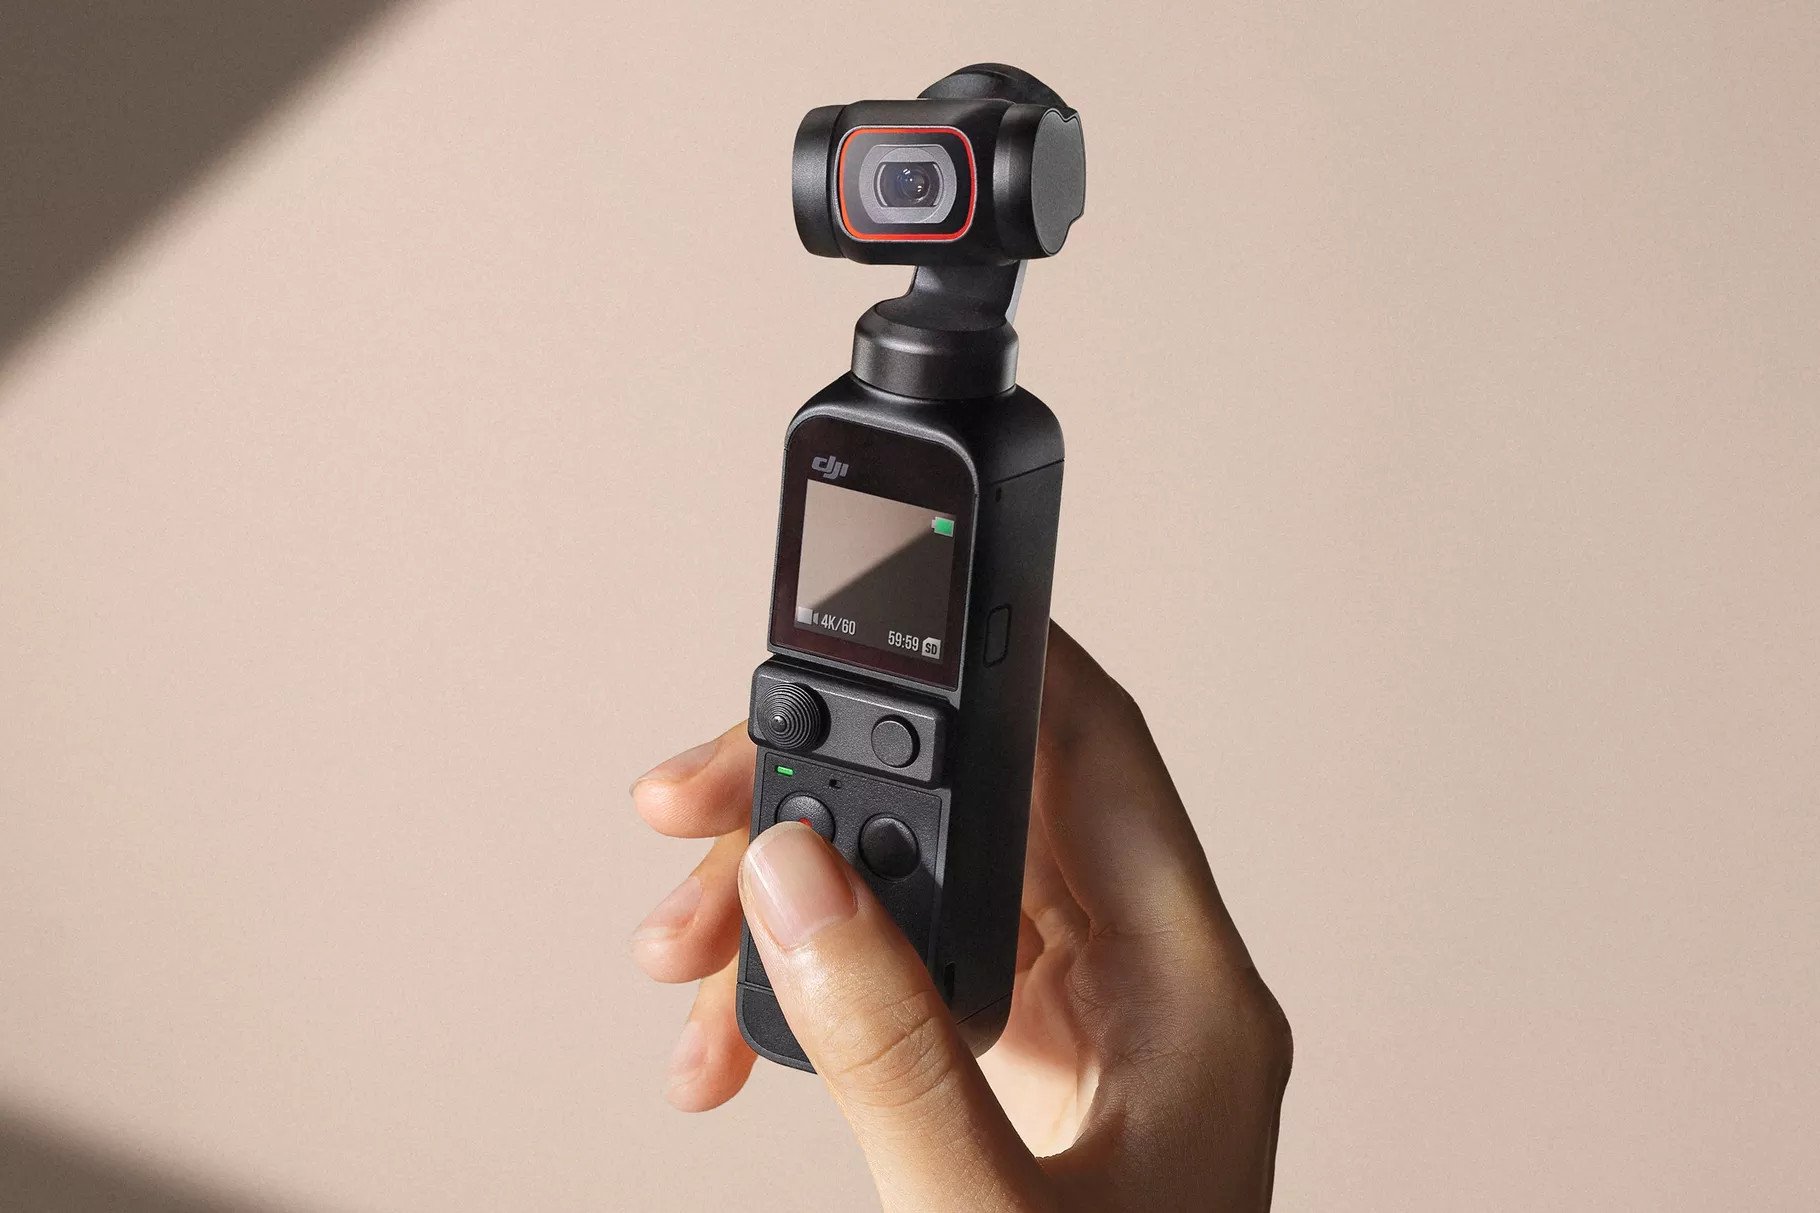 Dji Osmo Pocket Malaysia : DJI Osmo Pocket review: hands on | Camera Jabber / In just seconds, osmo pocket lets you share your life anywhere, anytime.